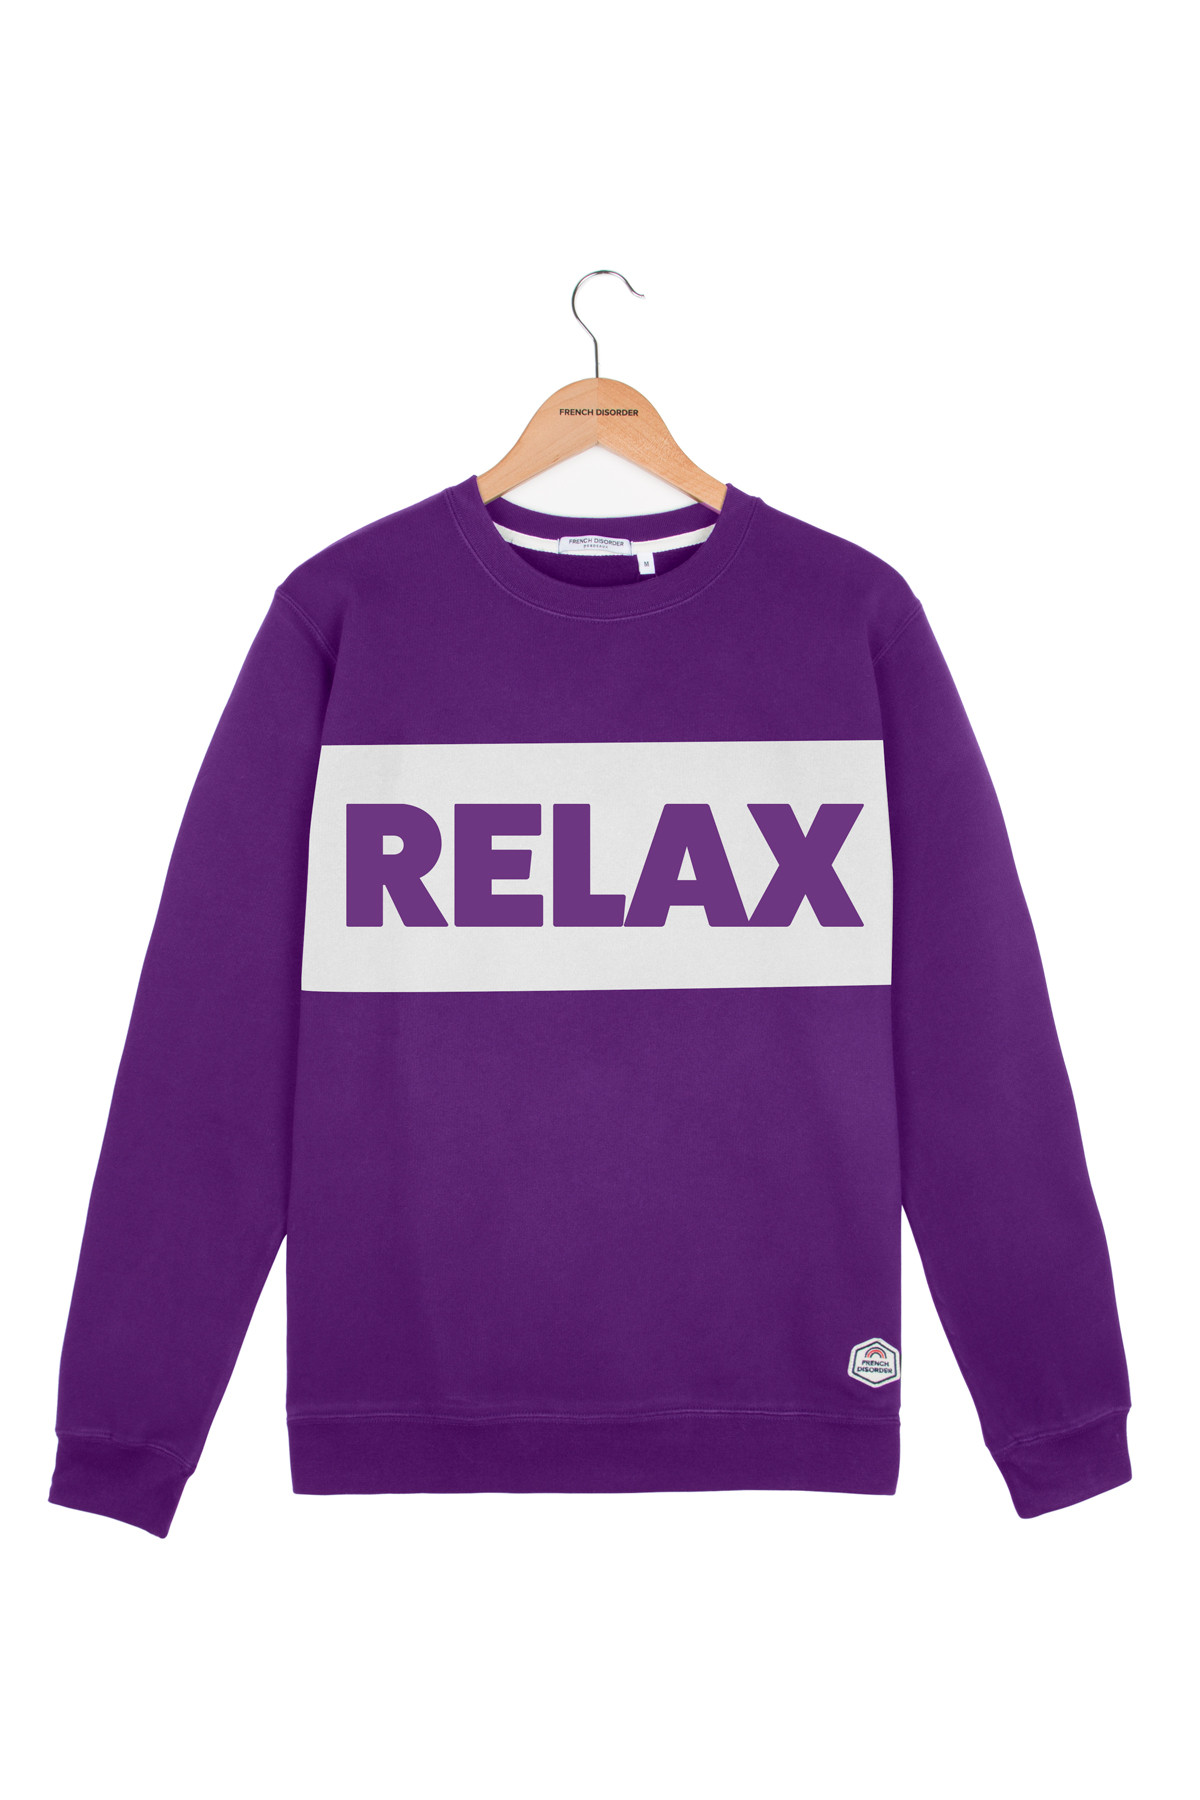 Photo de SOLDES FEMME Sweat RELAX chez French Disorder